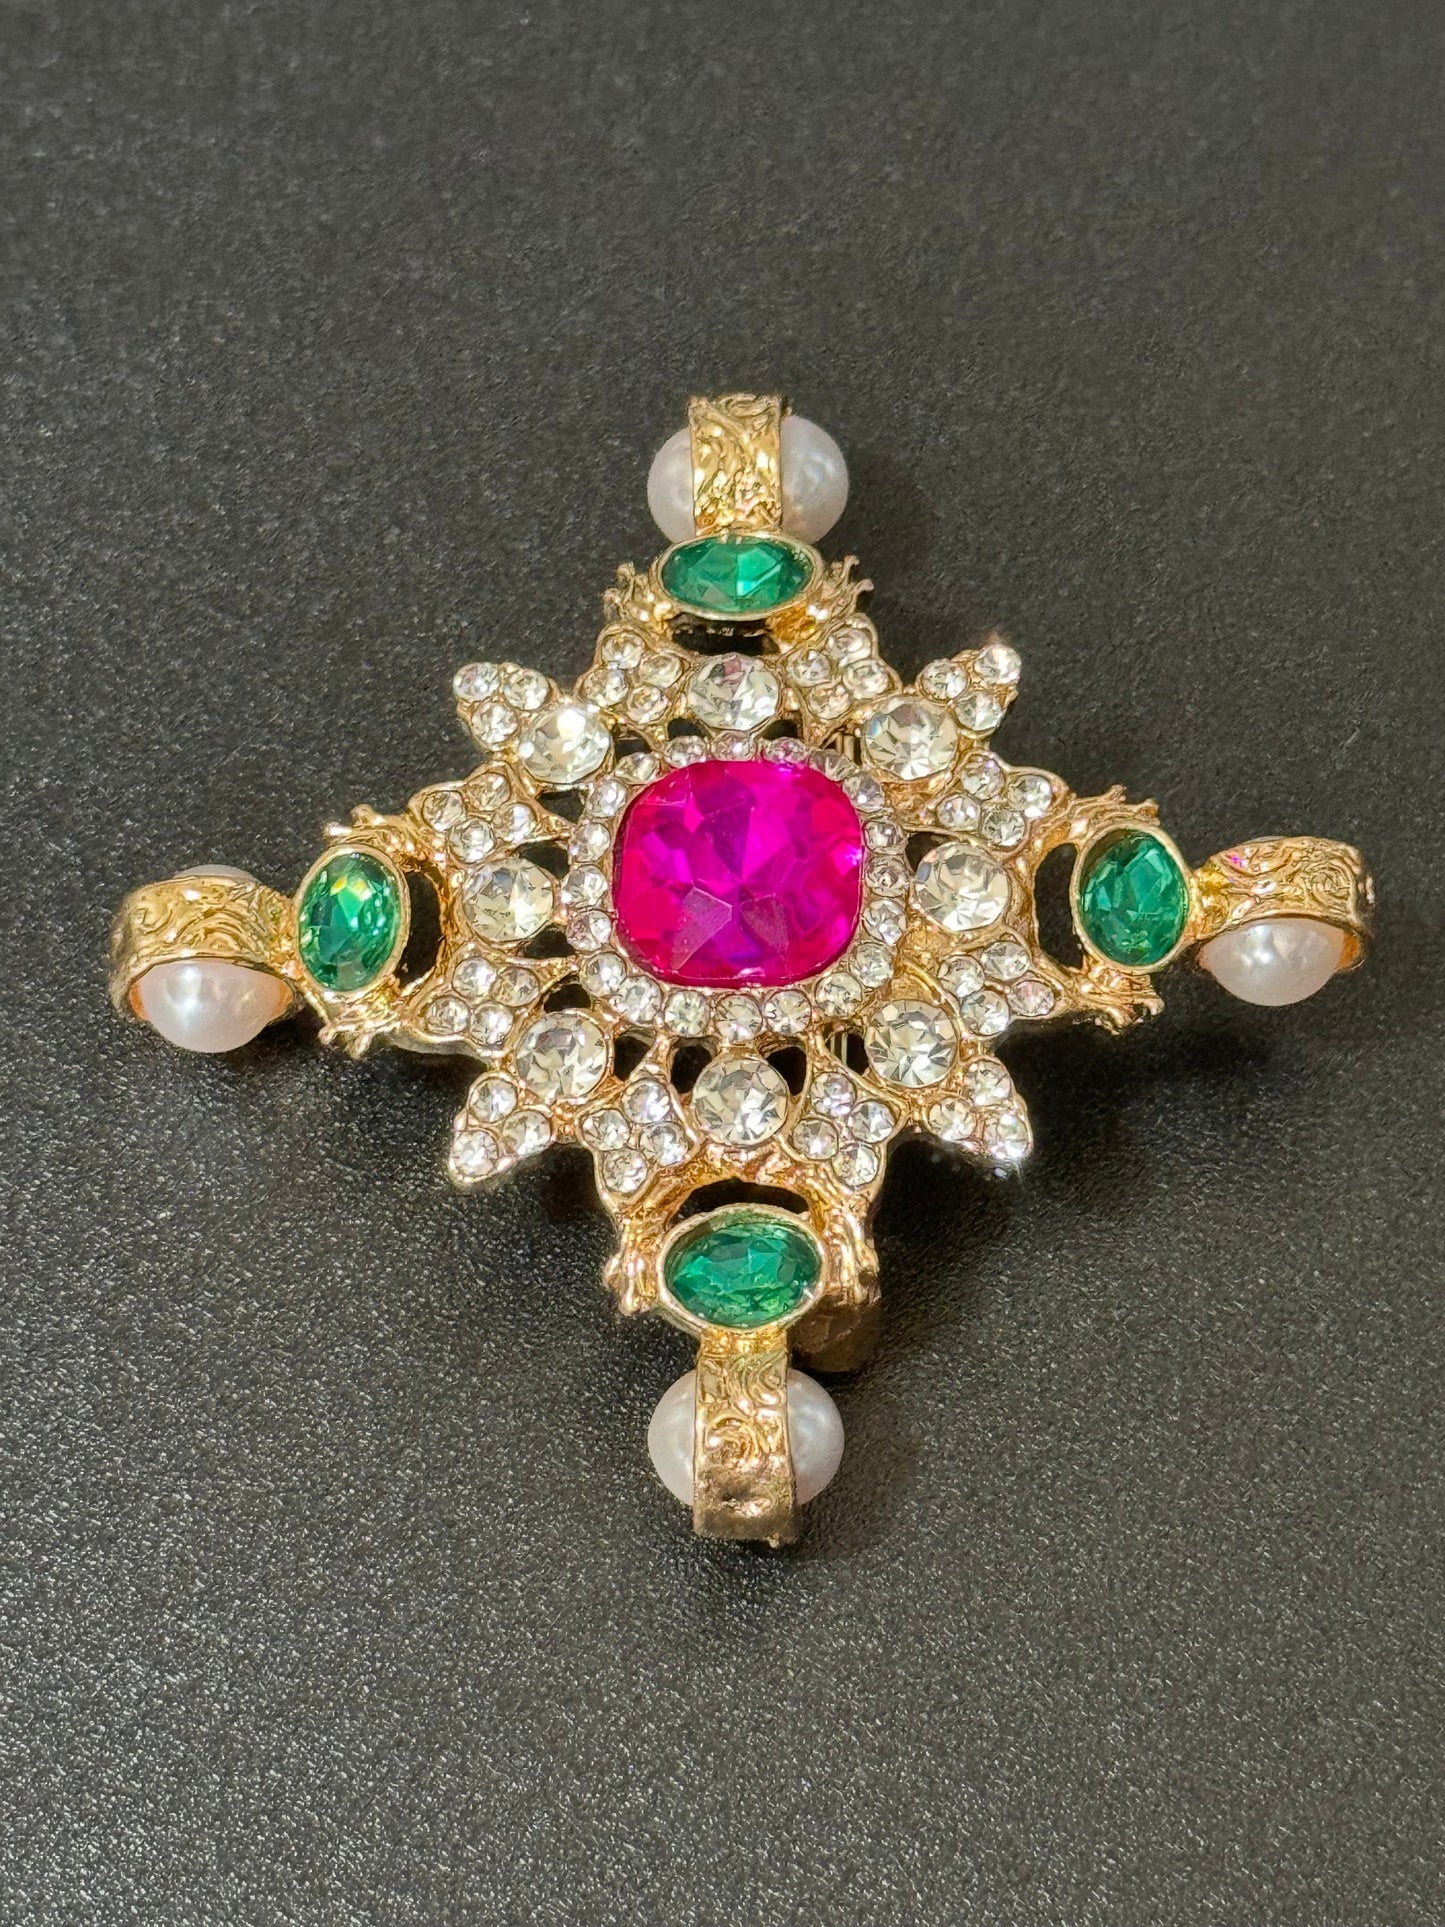 Large faux pearl and bright pink and emerald green diamanté rhinestone cross brooch